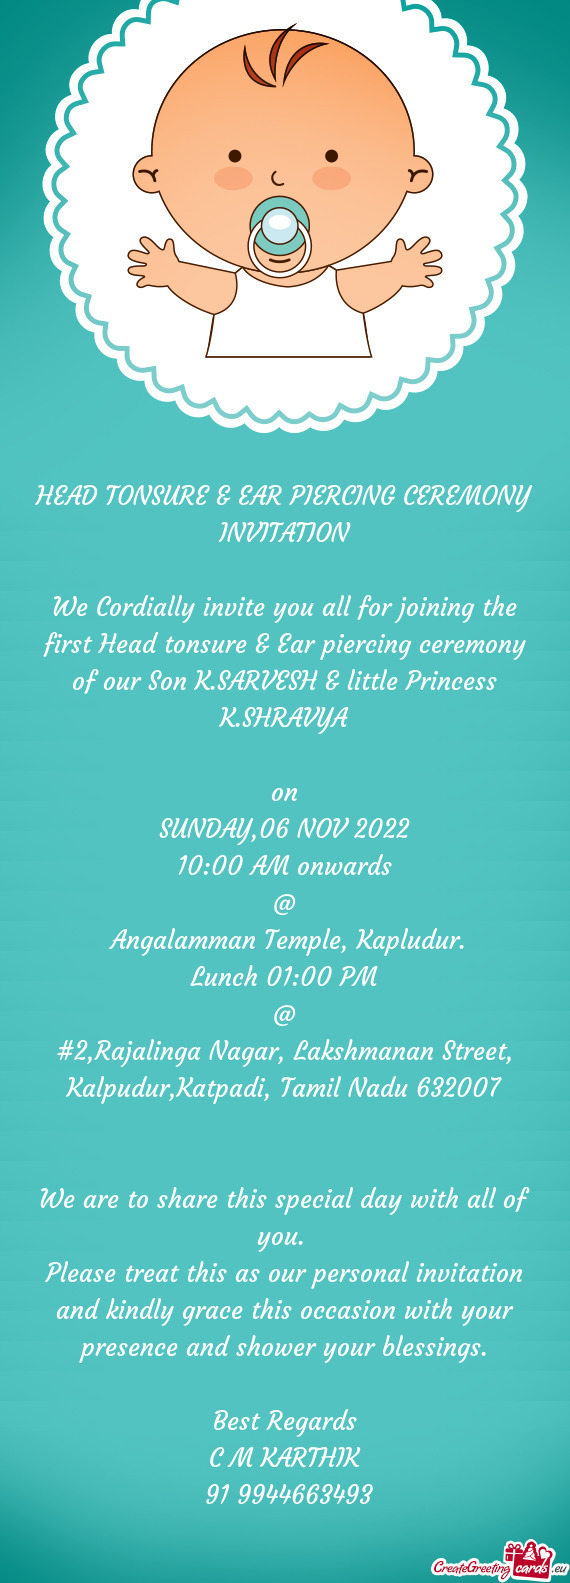 We Cordially invite you all for joining the first Head tonsure & Ear piercing ceremony of our Son K